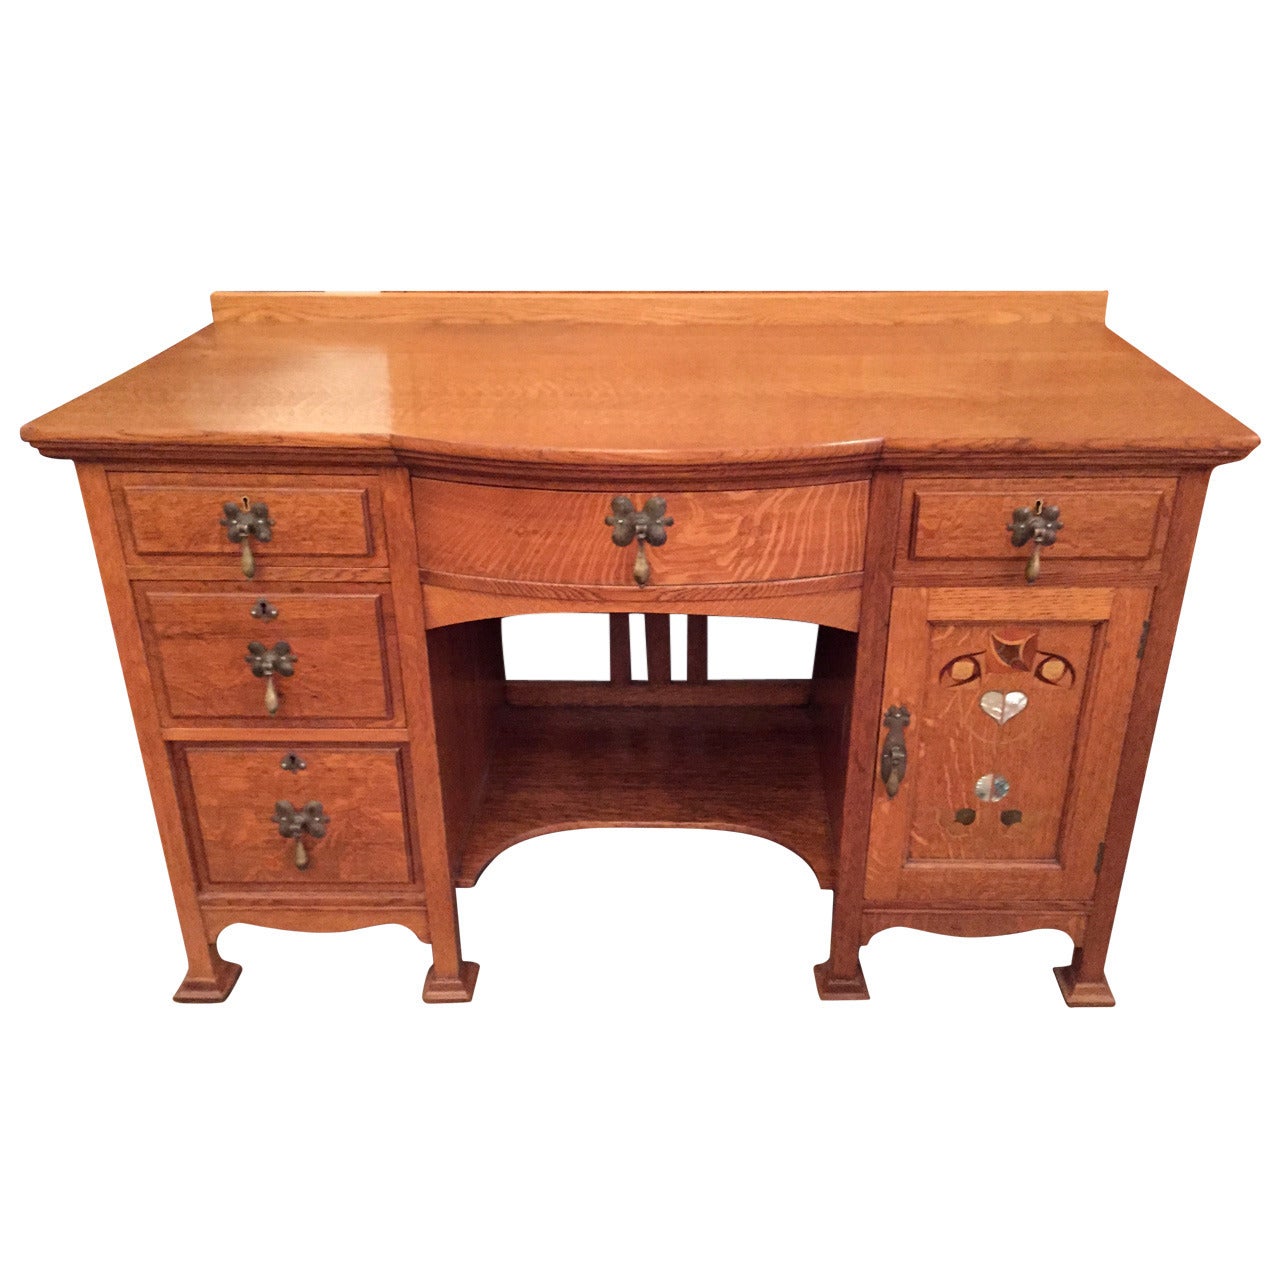 Shapland and Petter Desk or Cabinet